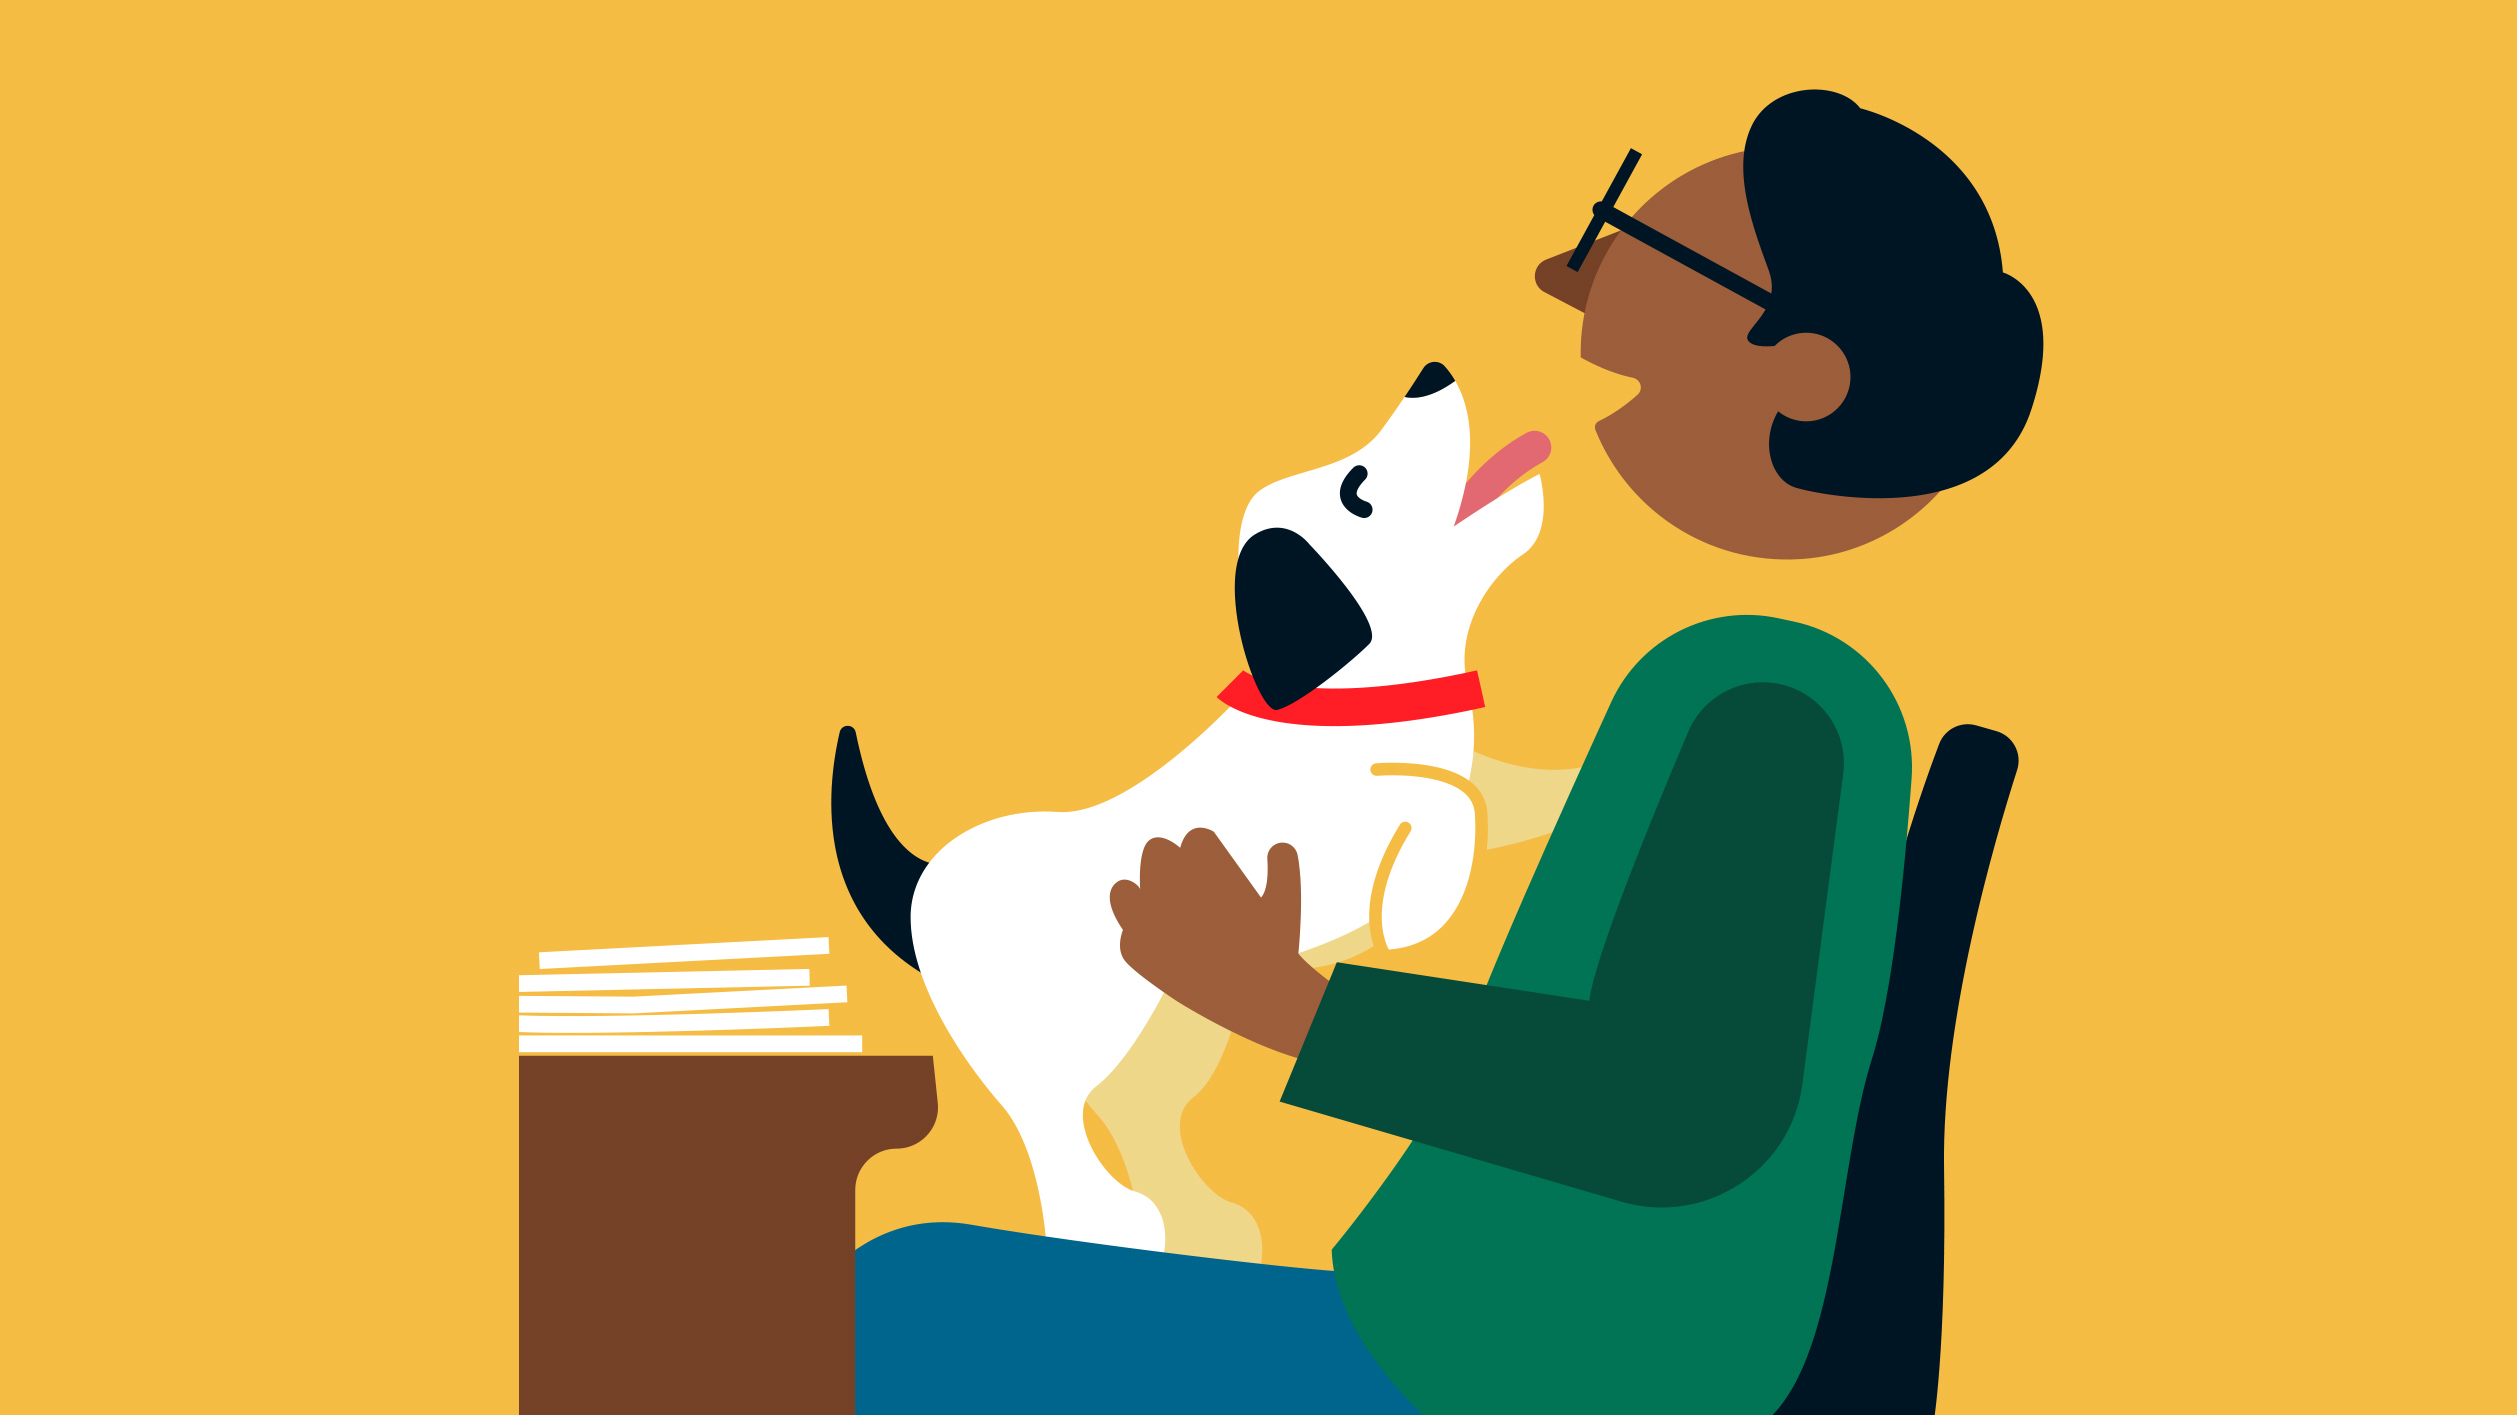 A new initiative from Experian allows you to get financial advice while playing with dogs